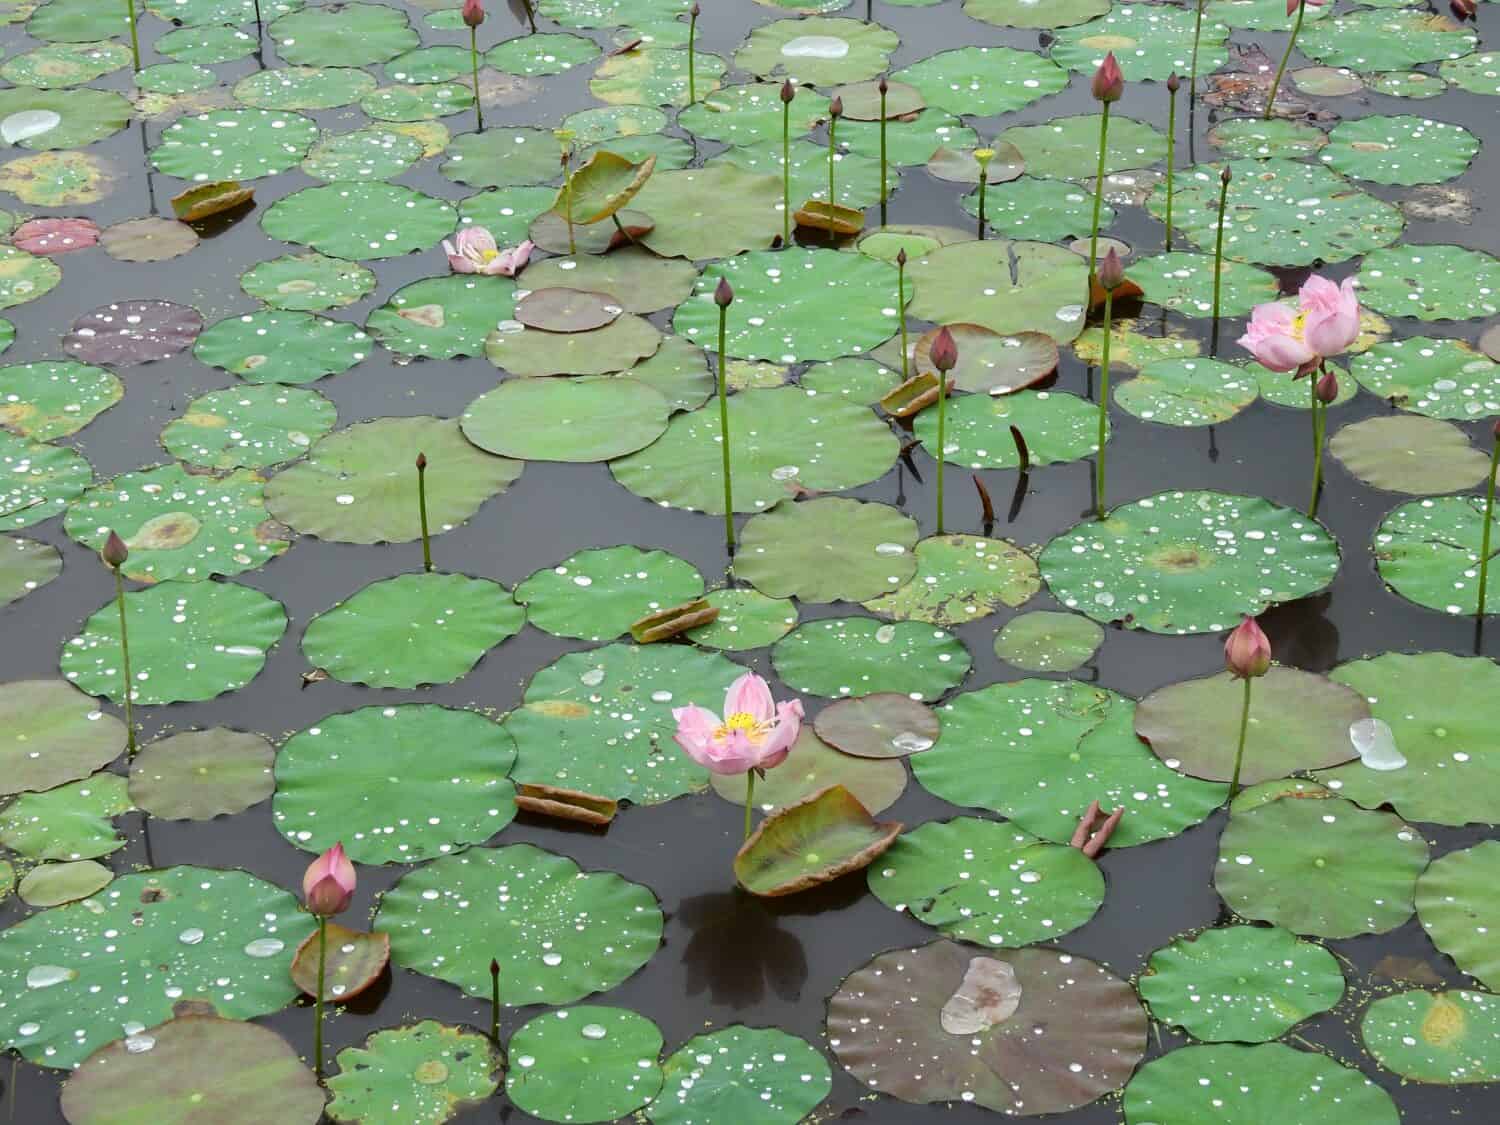 field of pink lotus blooming in the pond with water drops on green lotus leaf after rain